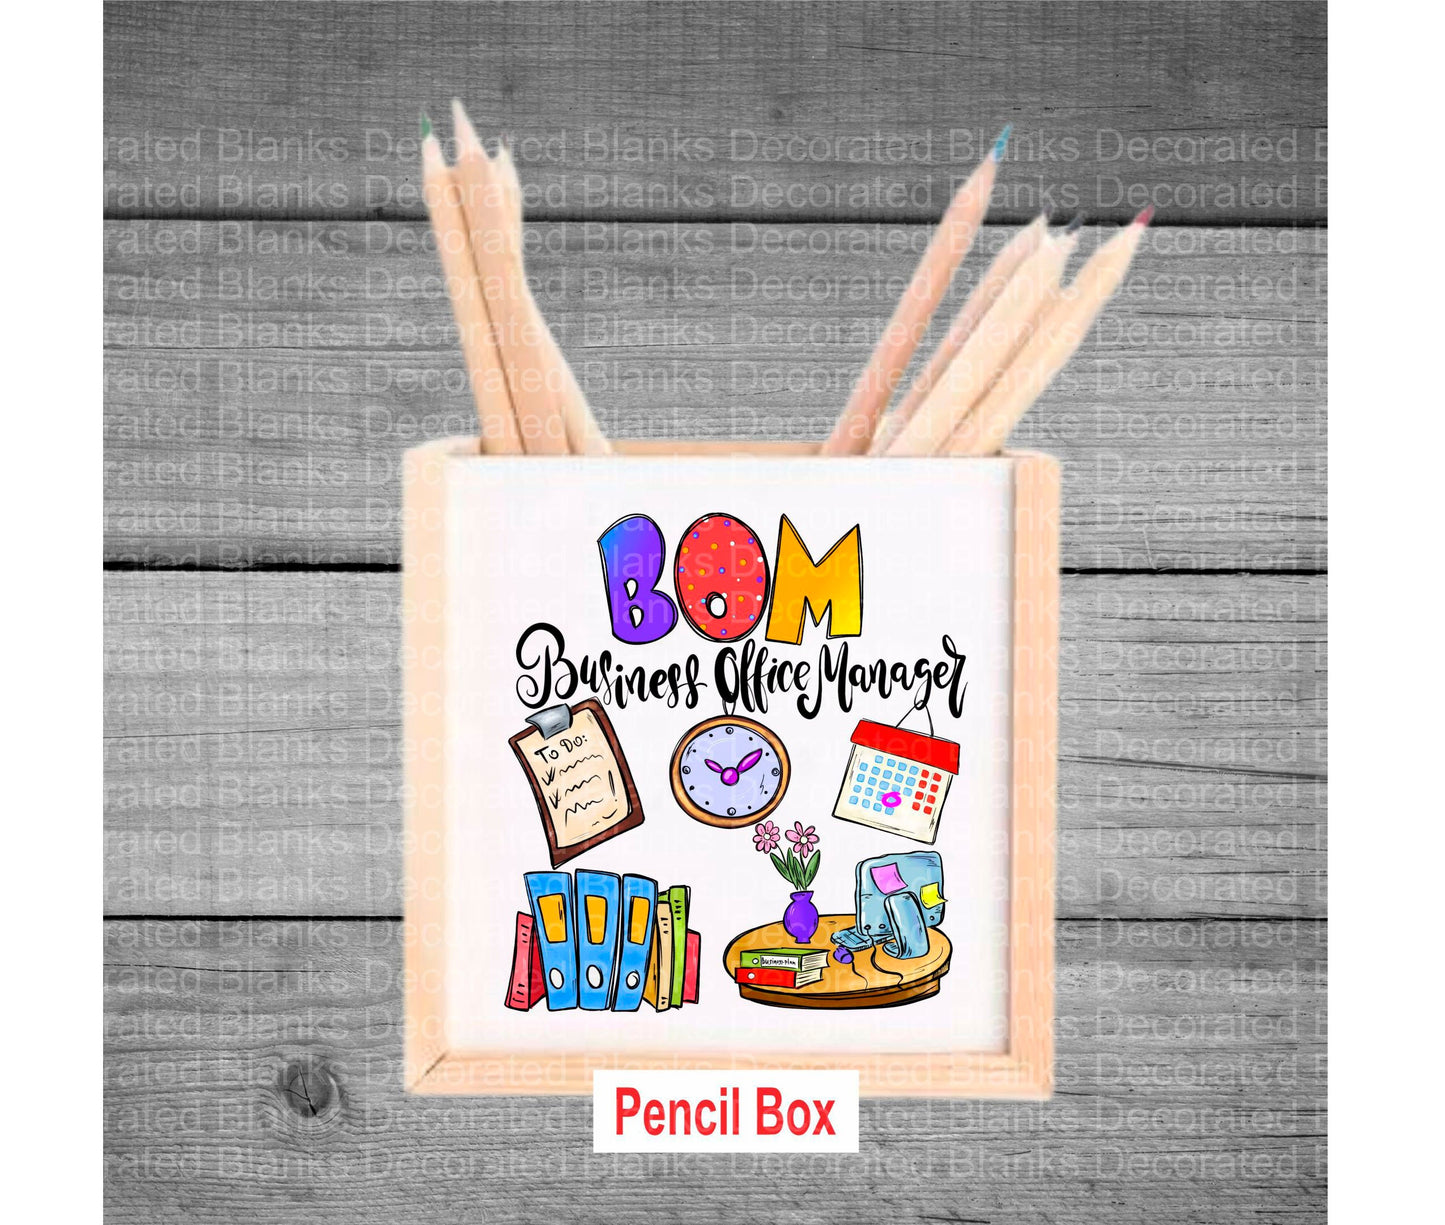 Business Office Manager Pencil Box/ Business Office Manager Gift/ Interchangeable Pencil Box/ Wood Pencil Box/ Desk Gift/ Office Manager